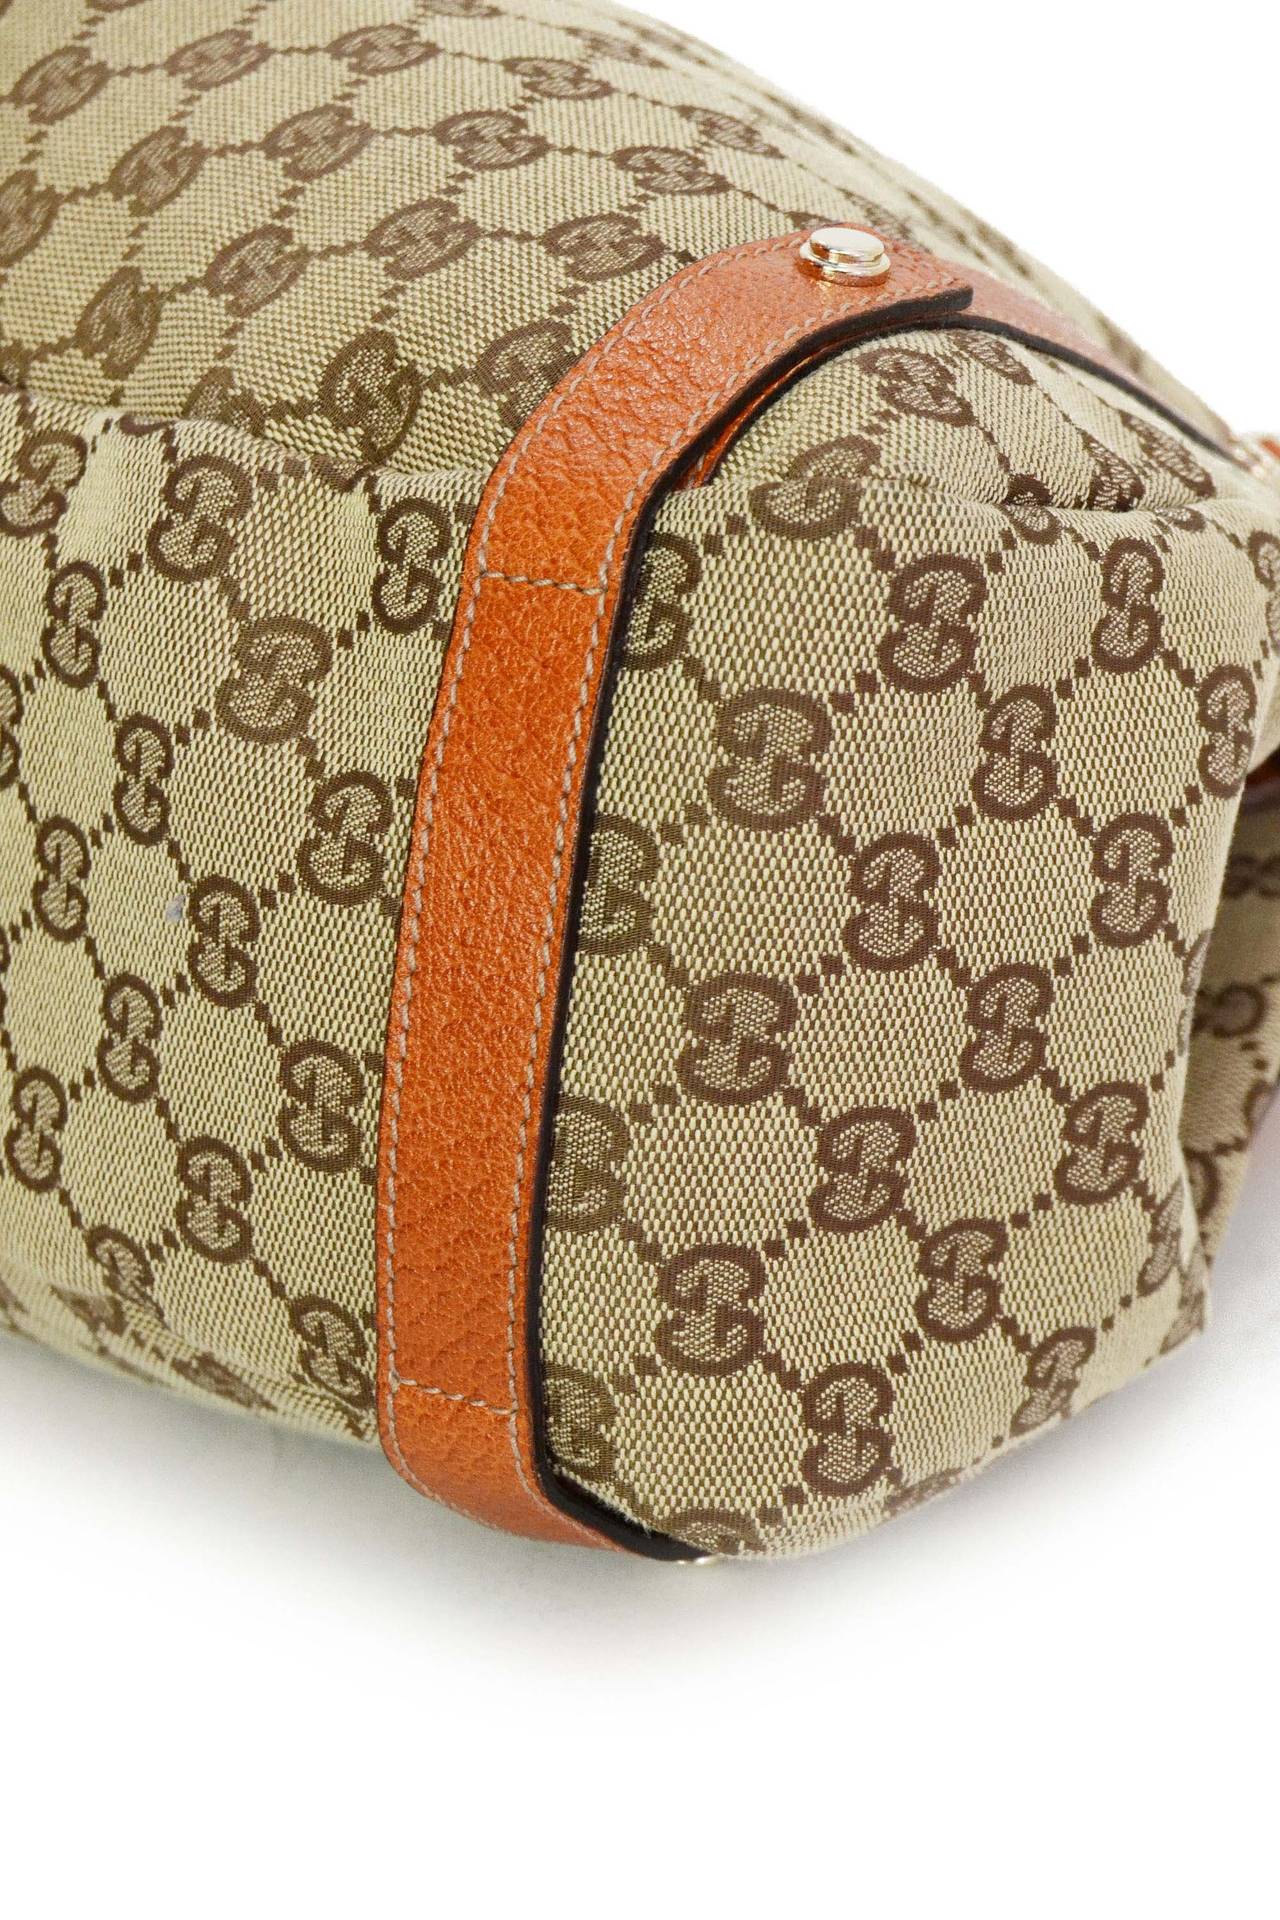 GUCCI Monogram Canvas and Orange Leather Tote Bag GHW at 1stdibs